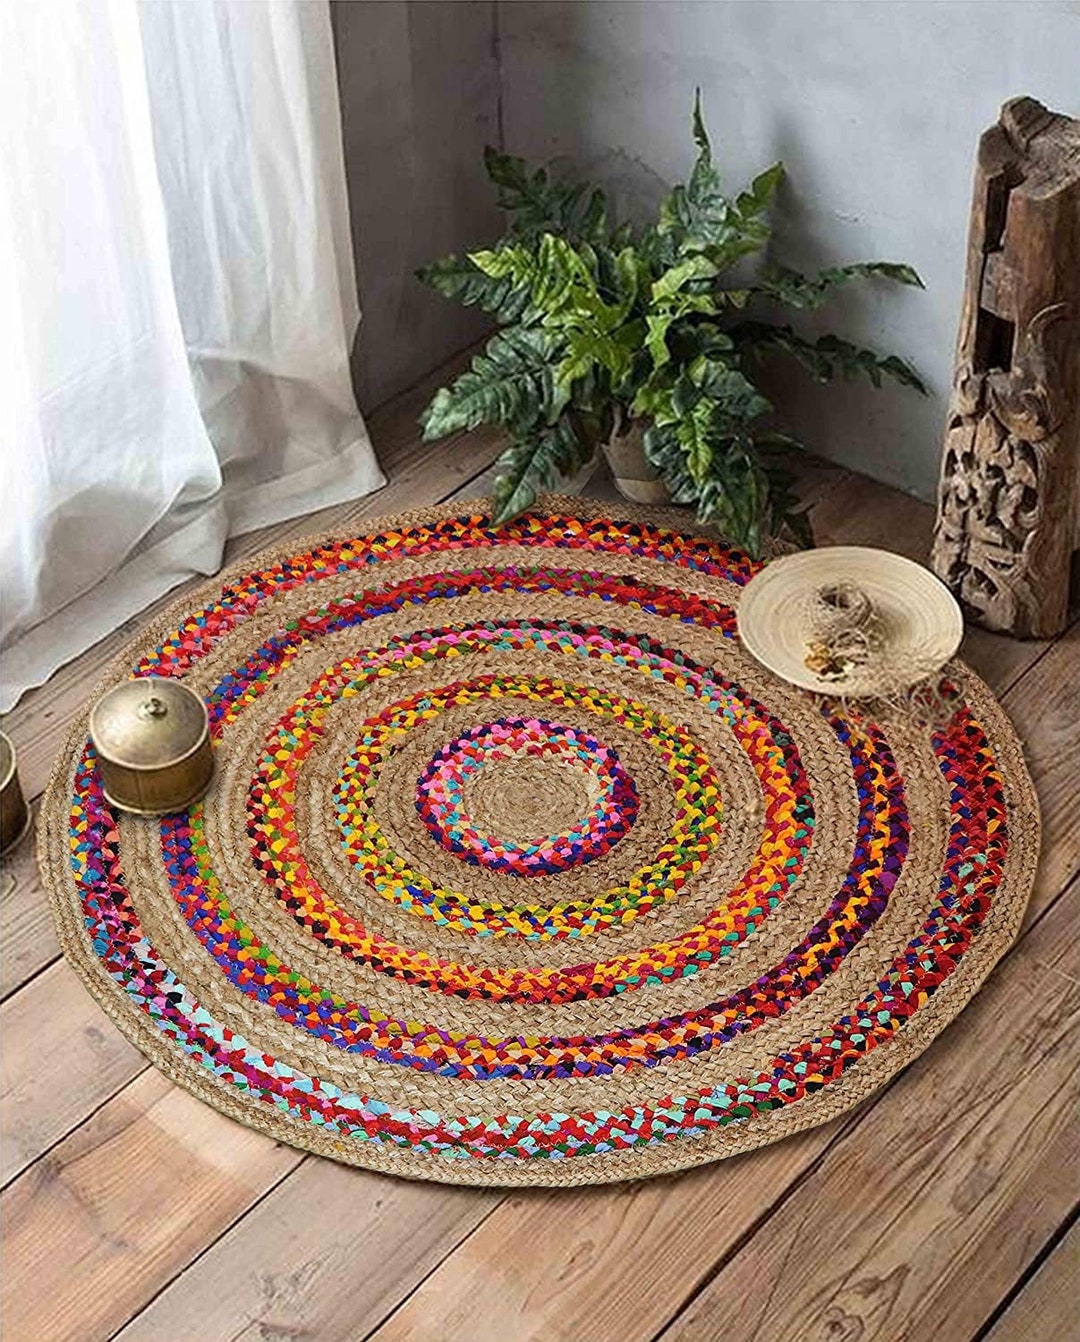 Braided Chindi Jute Round Area Rugs 4 X 4 With Free Shipping - Etsy